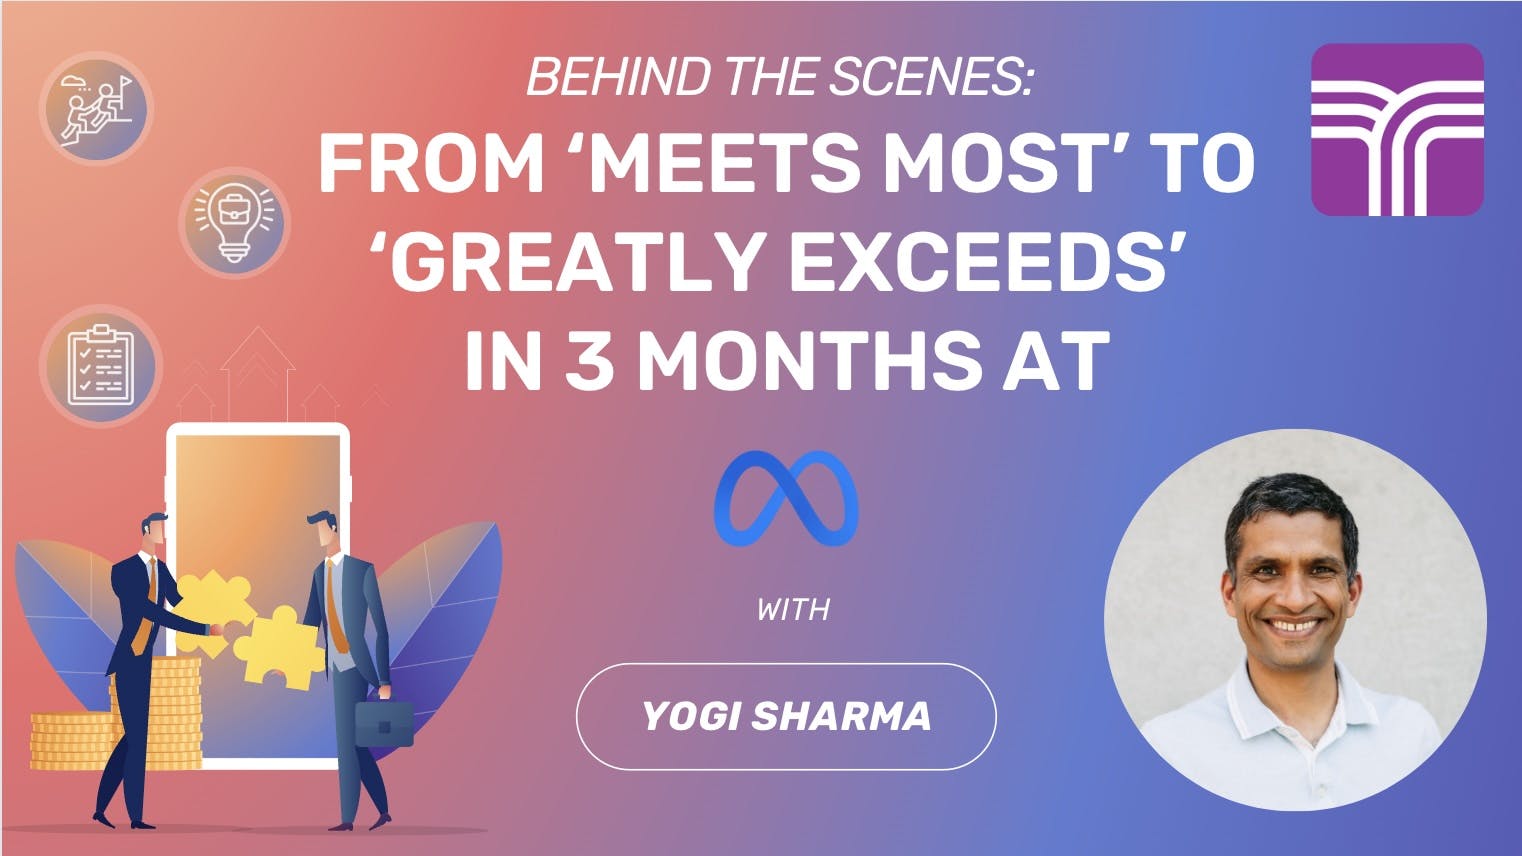 Behind the Scenes: From “Meets Most” to “Greatly Exceeds” in 3 Months at Facebook  event